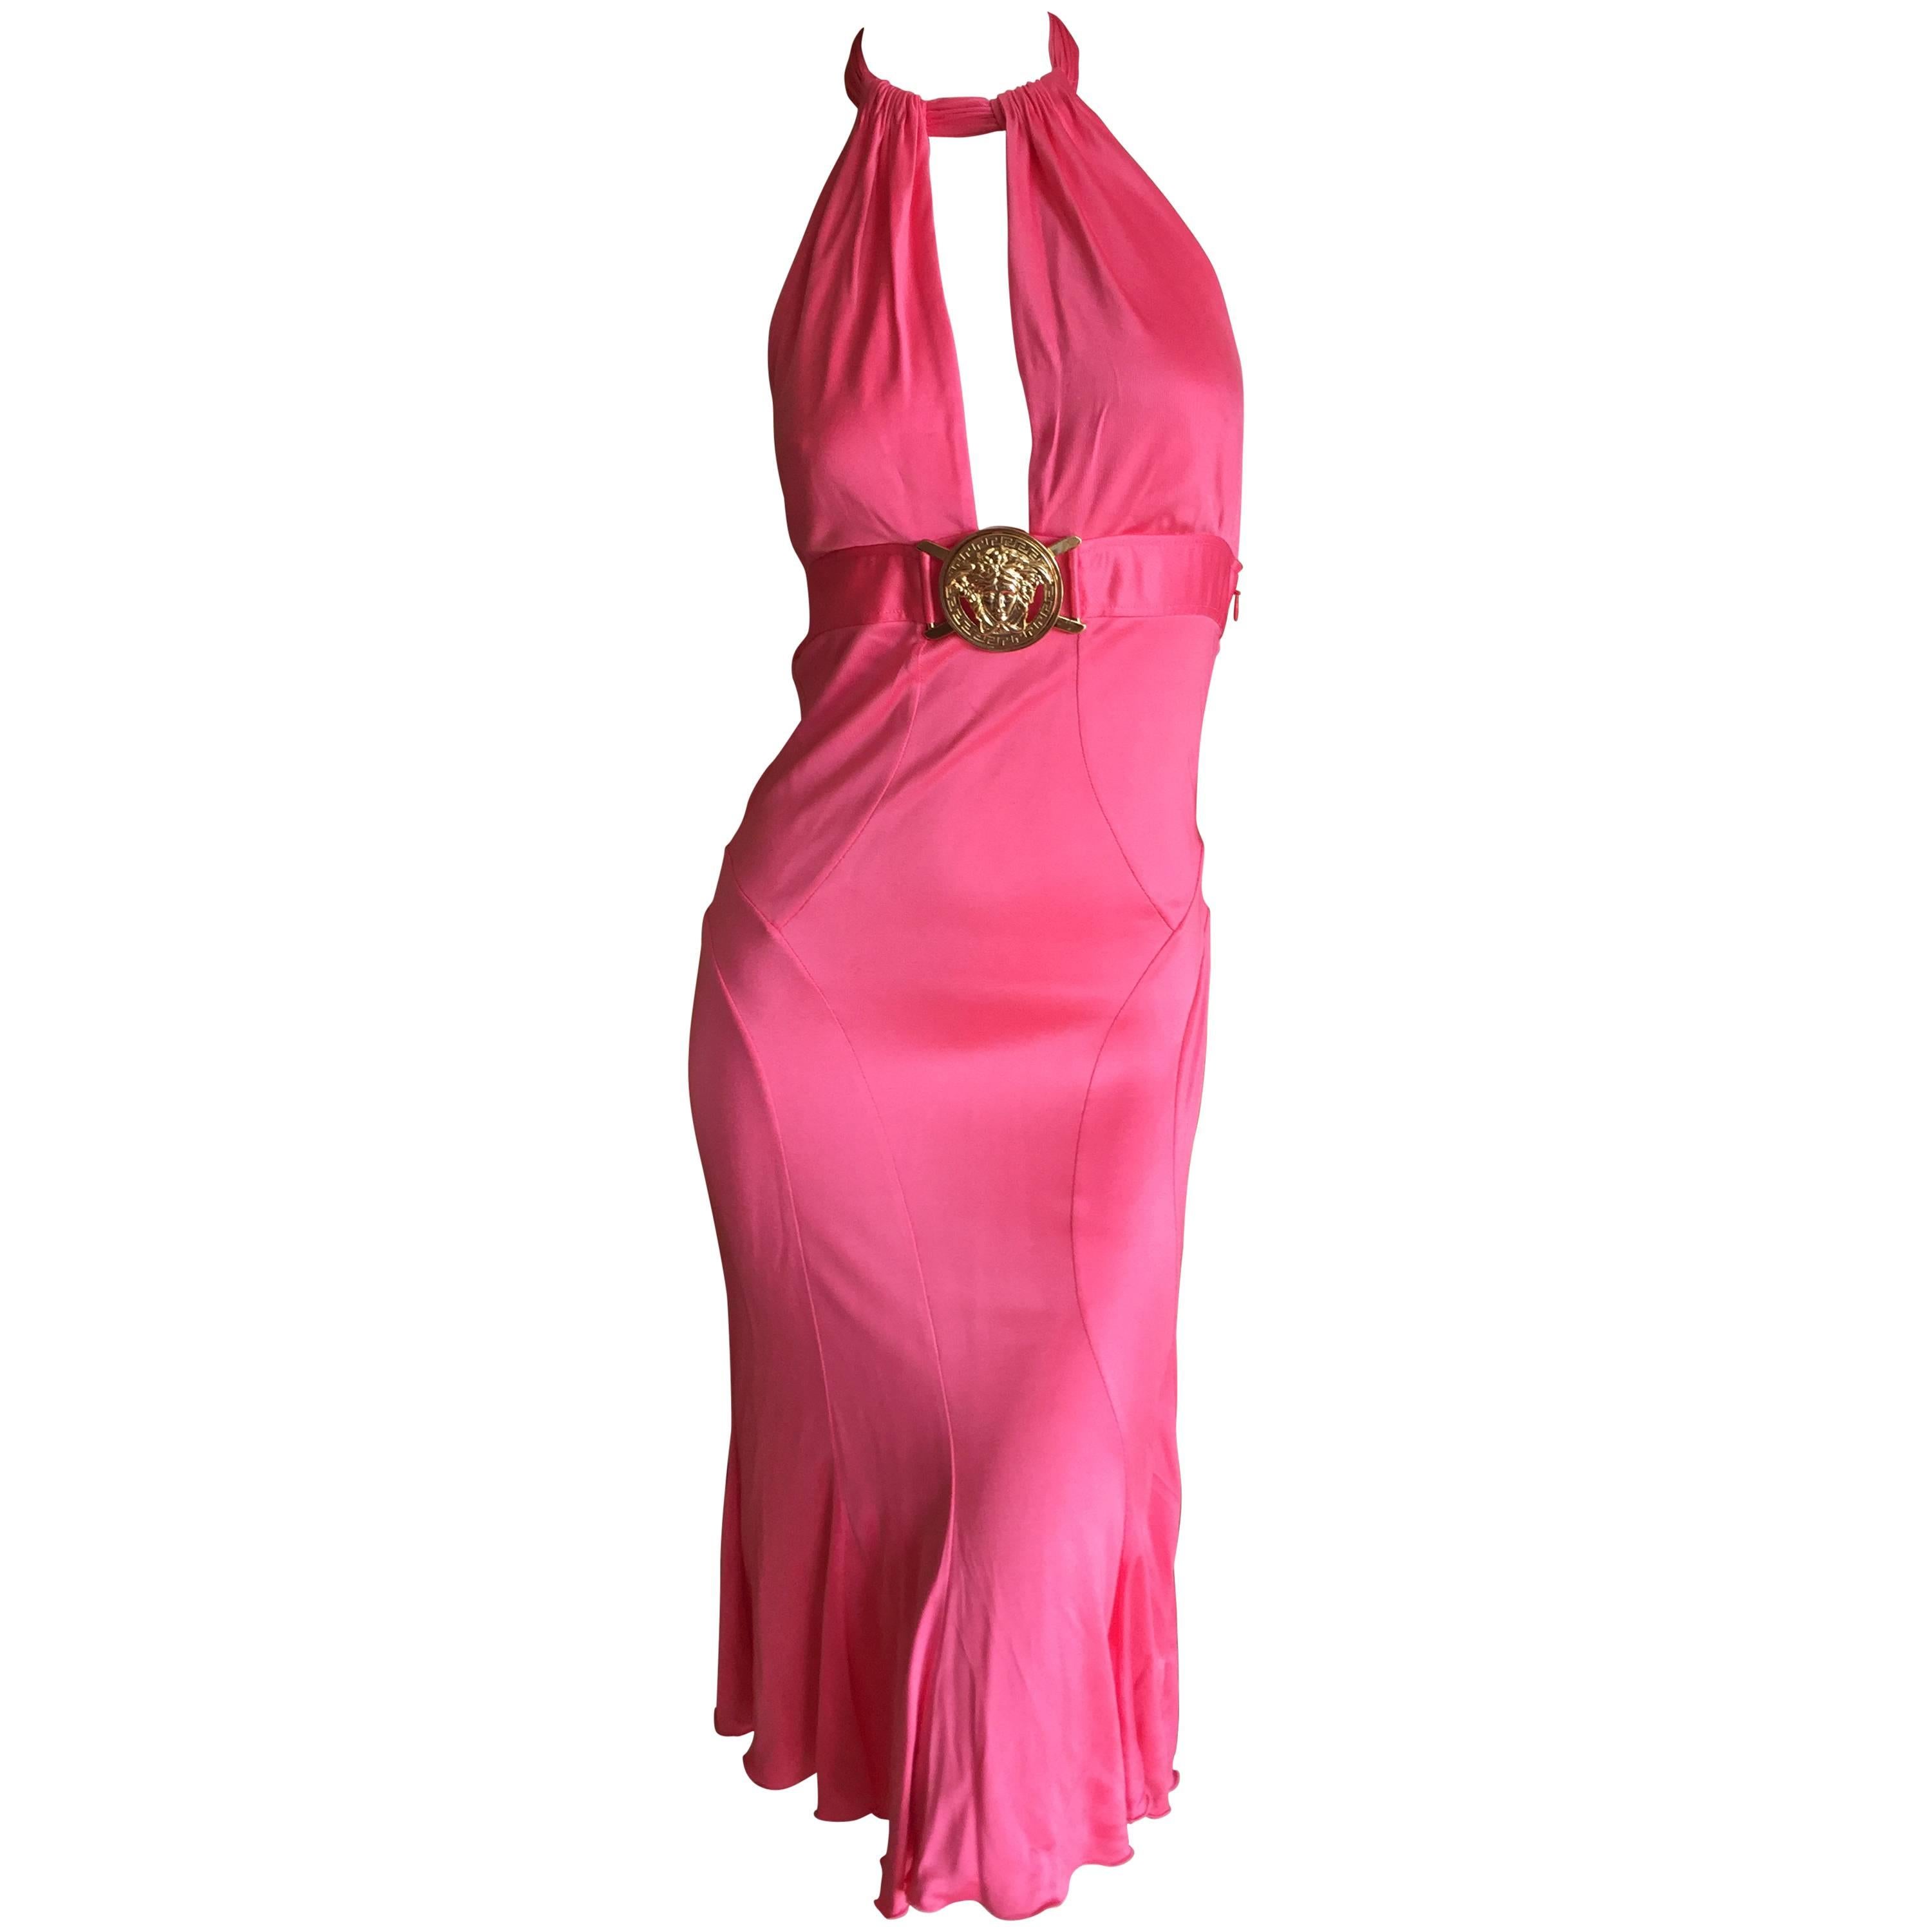 Versace Backless Pink Cocktail Dress with Large Gold Medusa Buckle